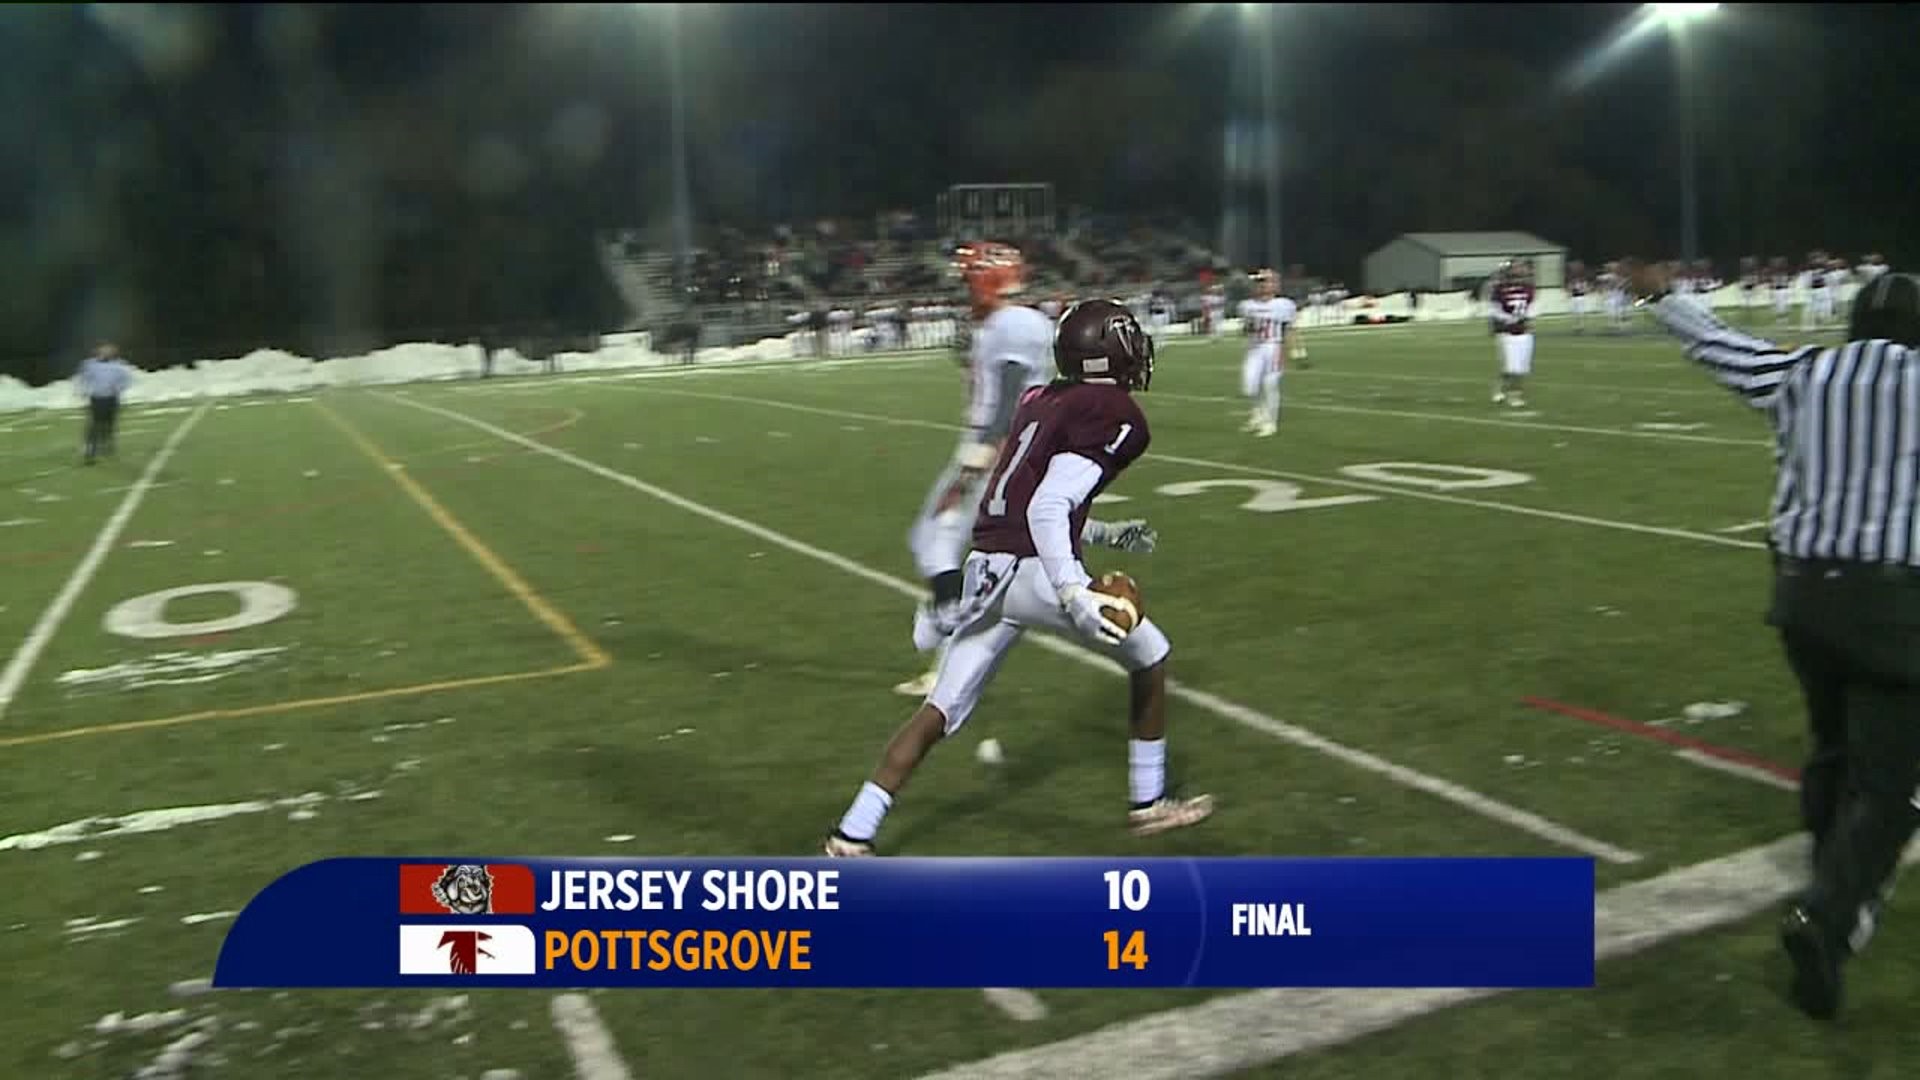 "Jersey Shore Comes Up Short Against Pottsgrove in State Tournament" is lockedJersey Shore Comes Up Short Against Pottsgrove in State Tournament